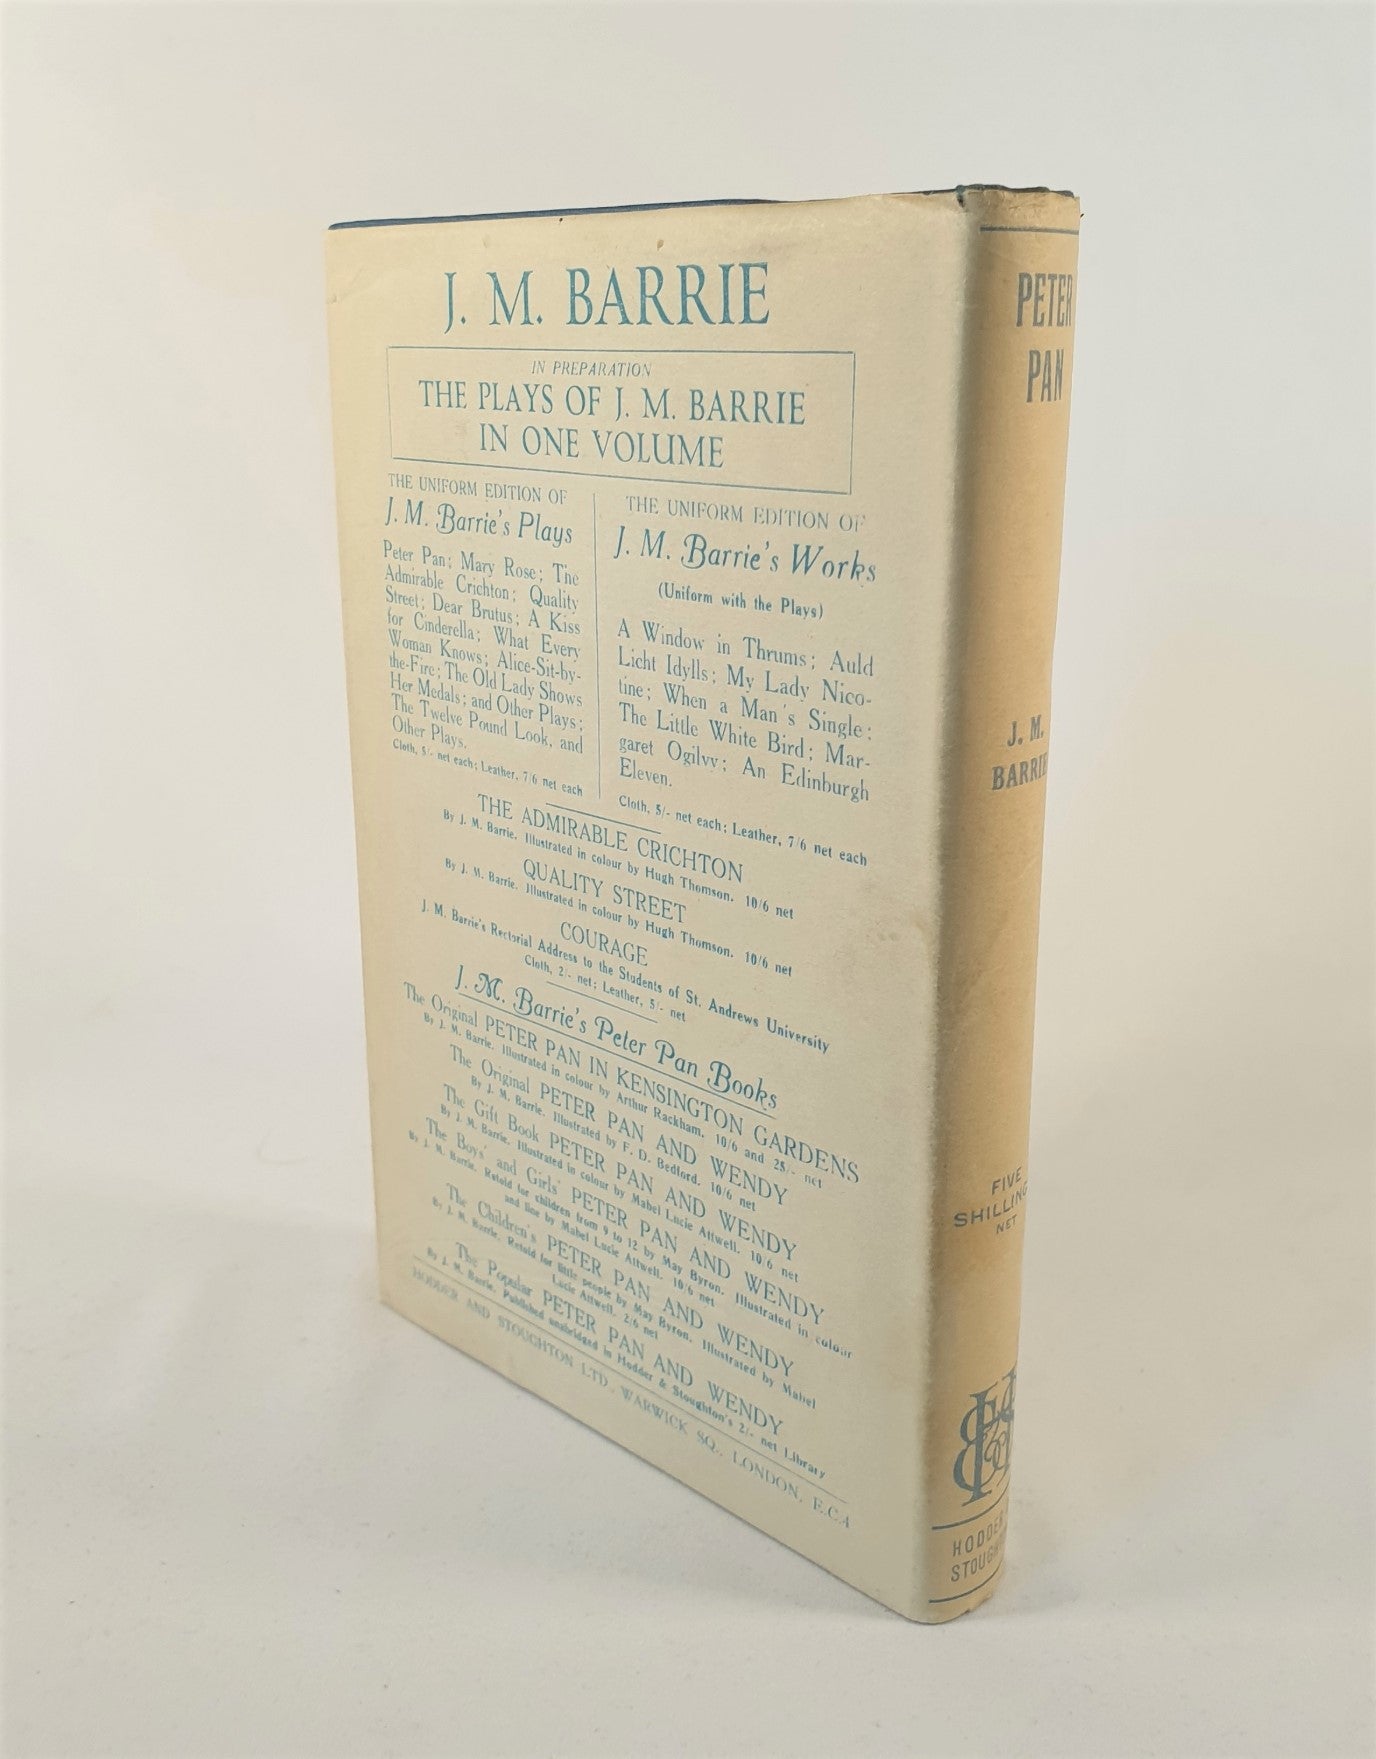 Barrie, J. M. - Peter Pan or The Boy Who Would Not Grow Up